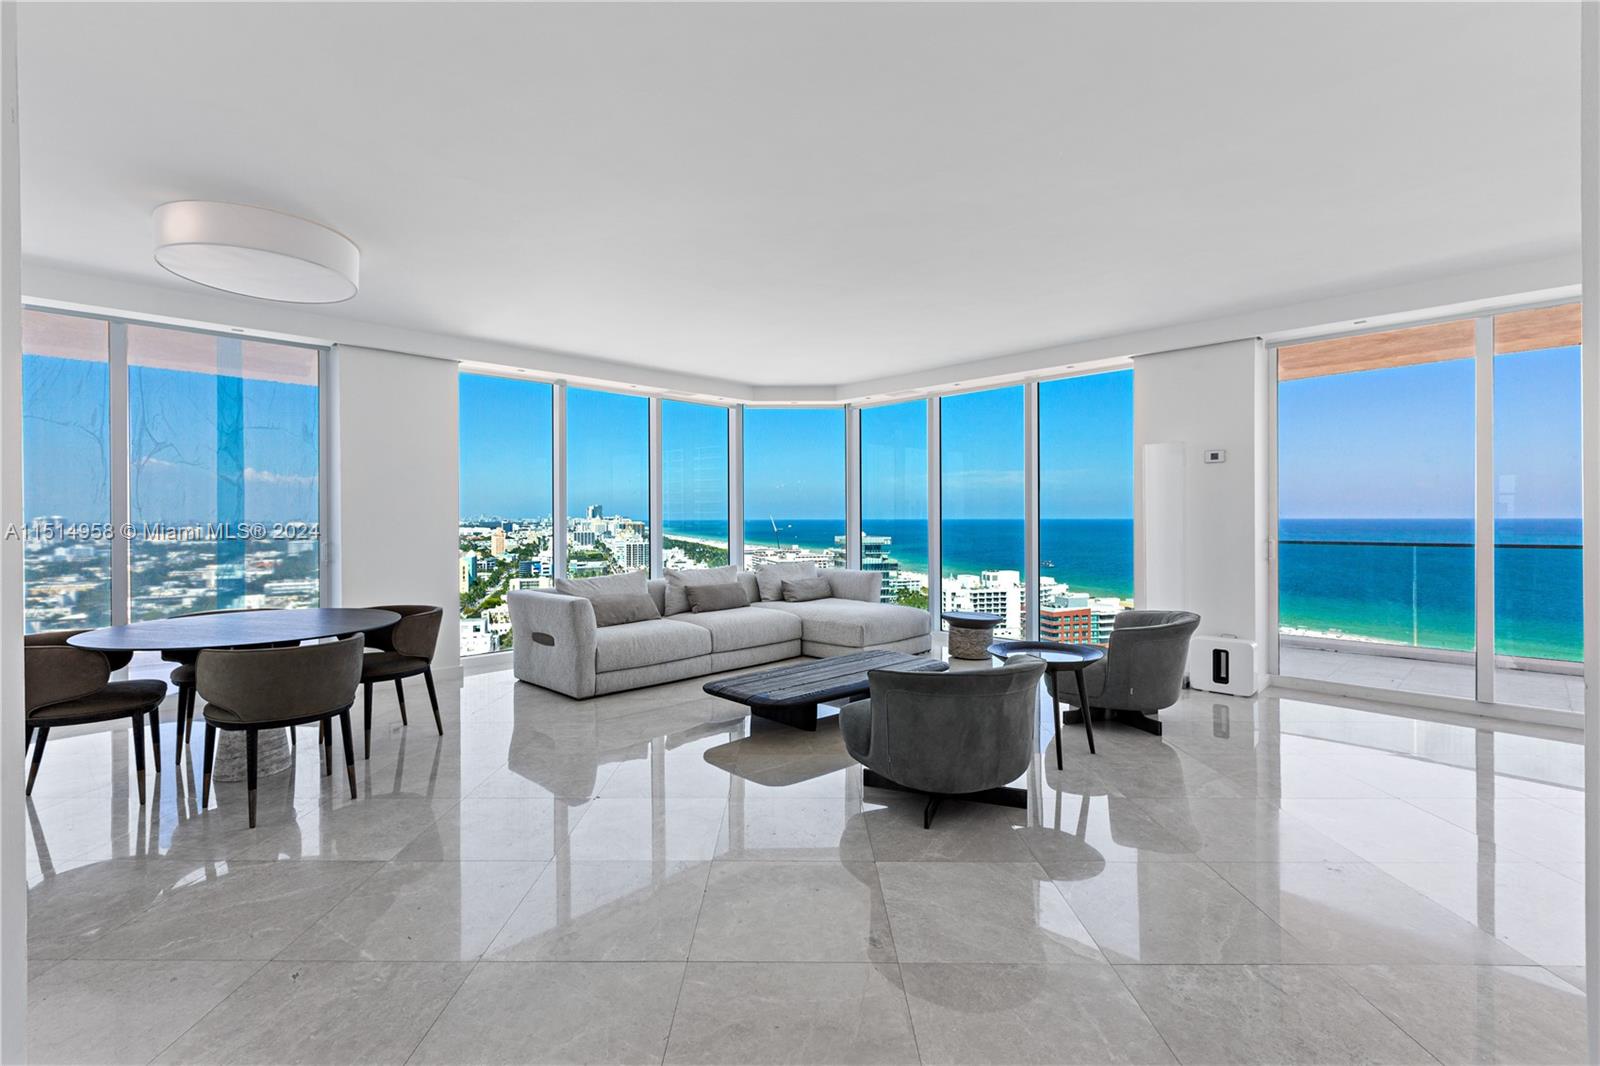 Completely renovated 3 Bed + 2.5 Bath corner residence at the prestigious Portofino Tower in the exclusive South of 5th Neighborhood. This immaculate residence offers incredible 270 degree panoramic views day and night of the Ocean, South Beach, Miami Skyline and Government Cut as cruise ships continuously sail by, all from floor to ceiling glass. This residence demonstrates the epitome of luxury with a custom kitchen with an extended eat-in island with views of the Ocean, remodeled bathrooms featuring a Master Bath with a free standing soaking tub with Ocean views, separate expansive shower and dual sinks. Marble floors, recessed lighting, linear diffusers, custom doors, intelligently integrated built-ins & electric window treatments. No detail has been overlooked. Furniture negotiable.